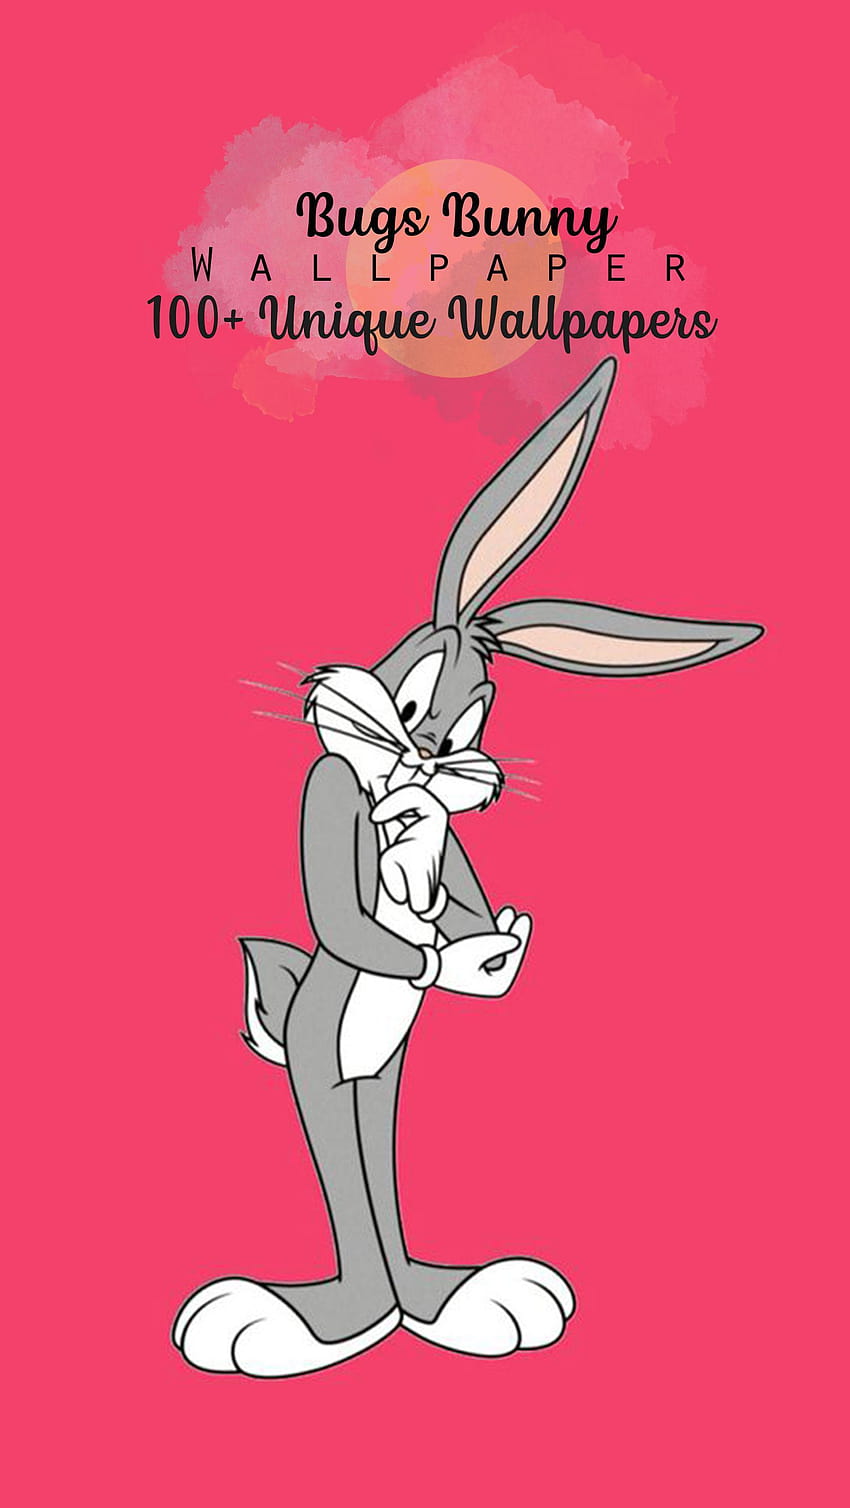 Bugs Bunny (Looney Tunes)  Gucci wallpaper iphone, Bunny wallpaper, Cartoon  wallpaper iphone